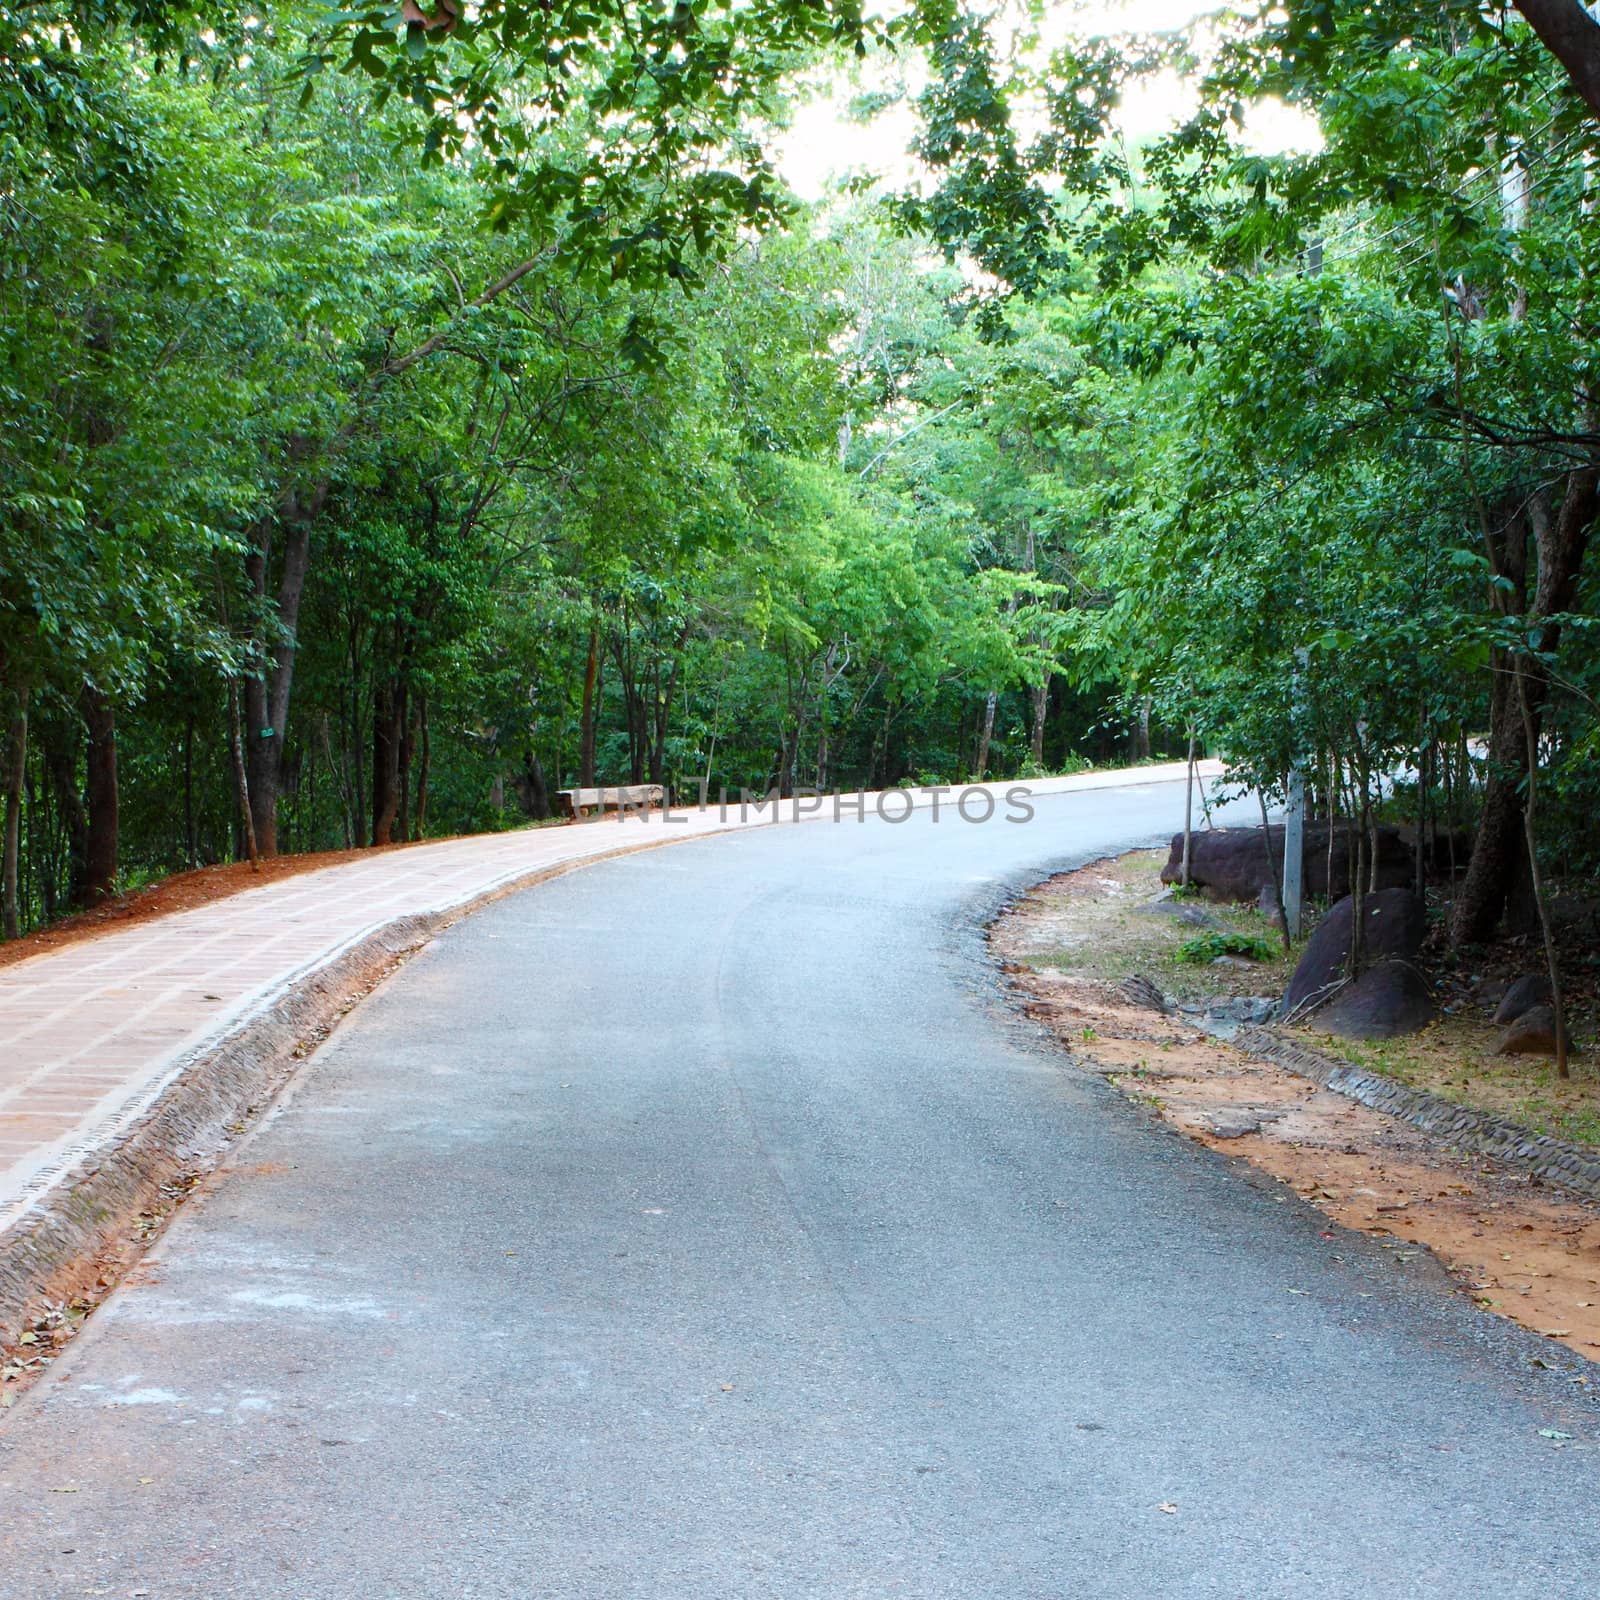 curved road with trees on both sides by geargodz